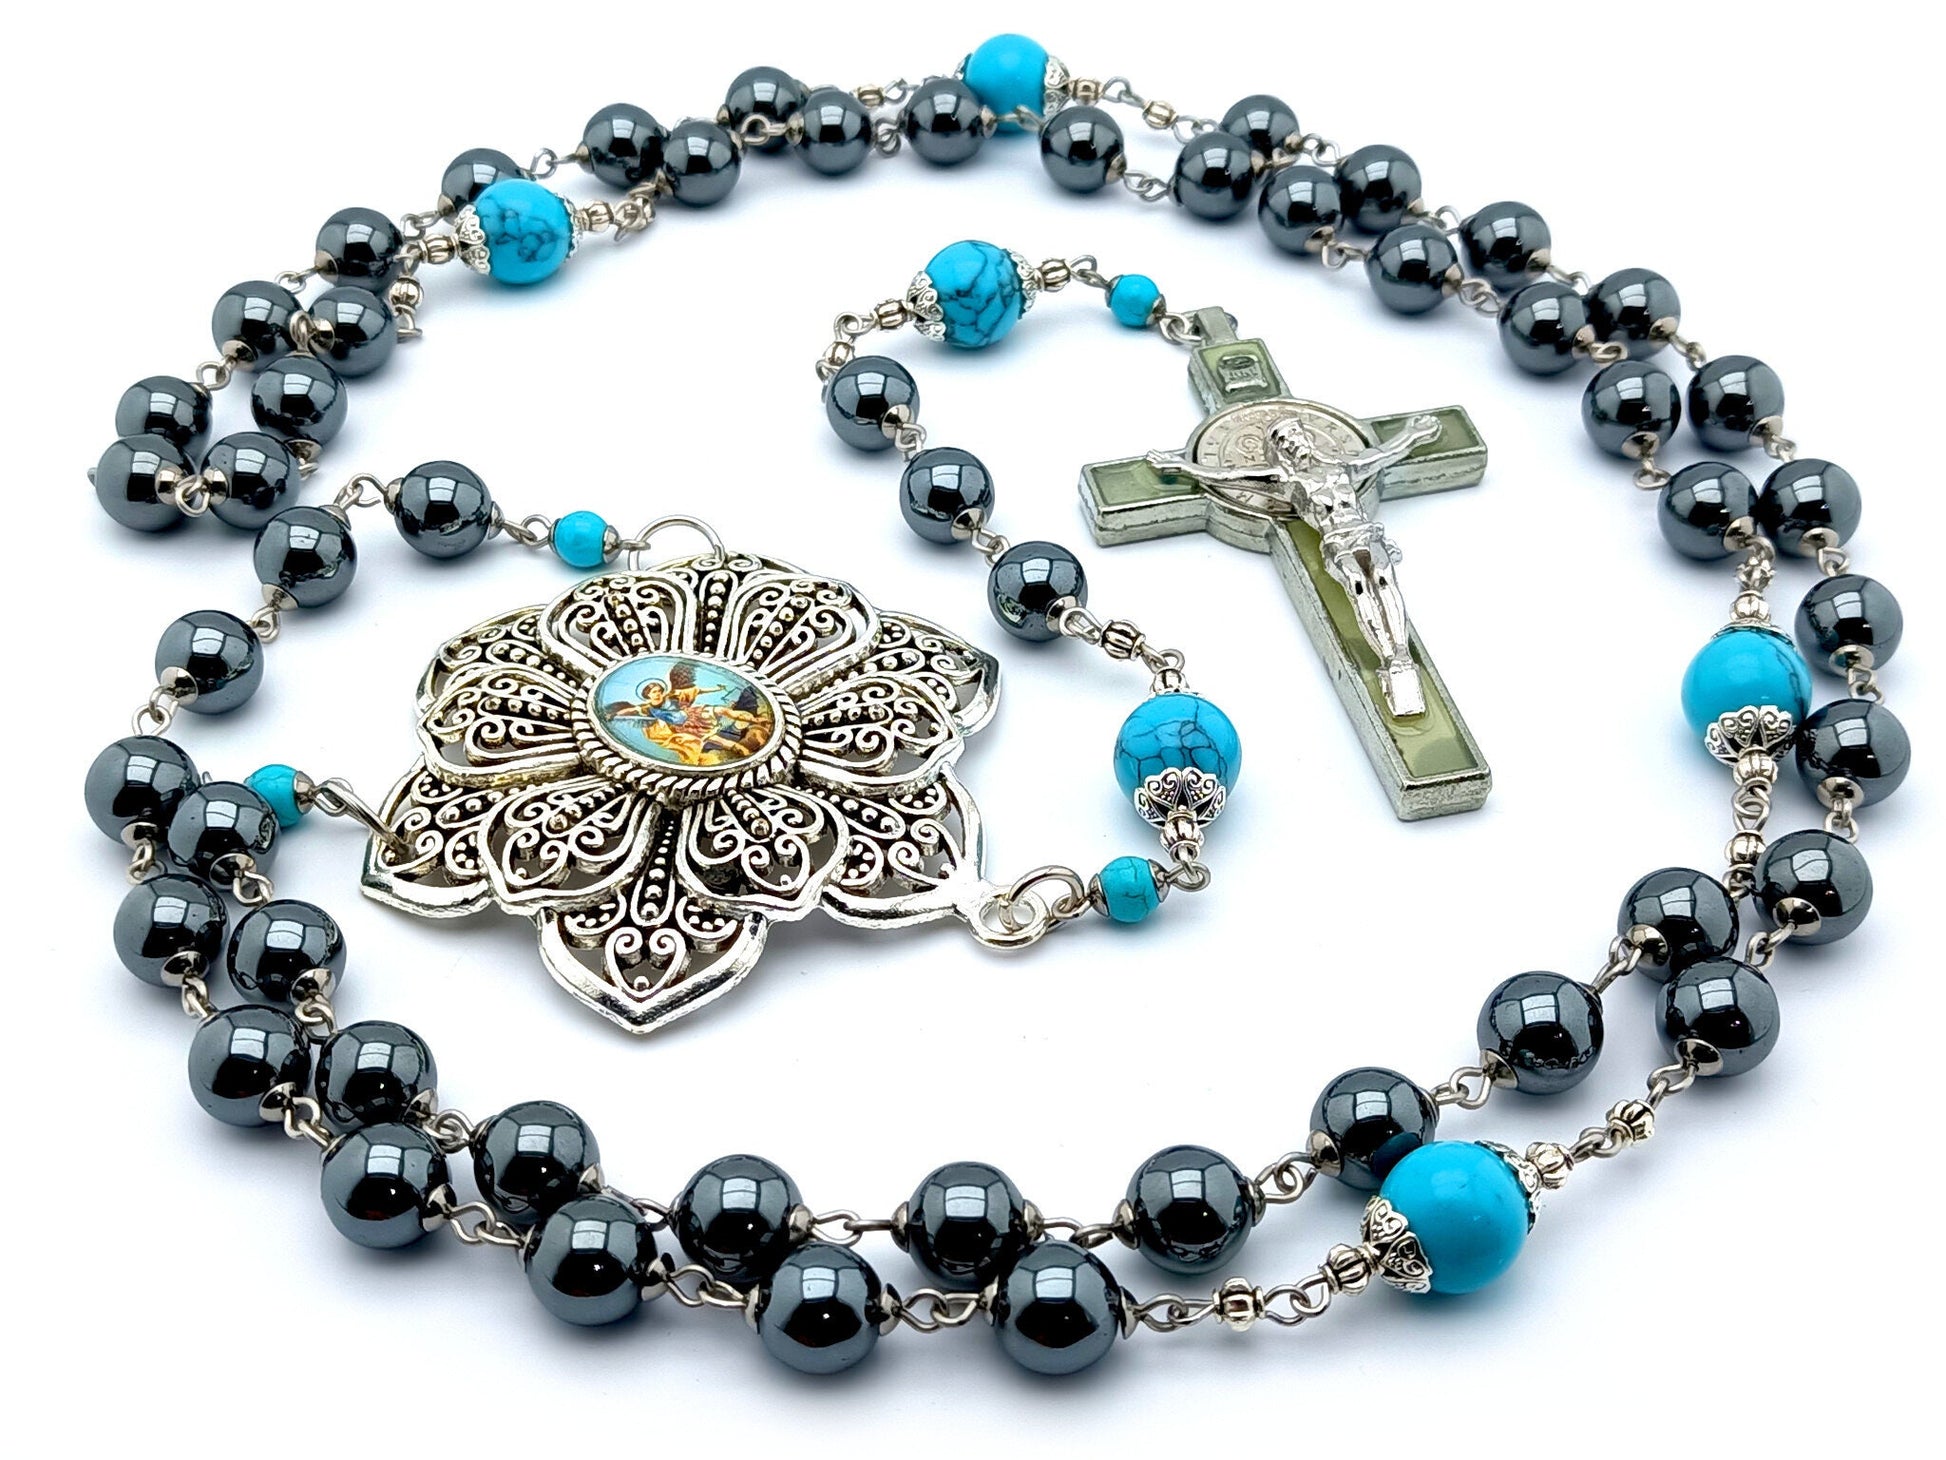 Saint Michael unique rosary beads with hematite and turquoise beads, luminous Saint Benedict crucifix and large silver picture centre medal.